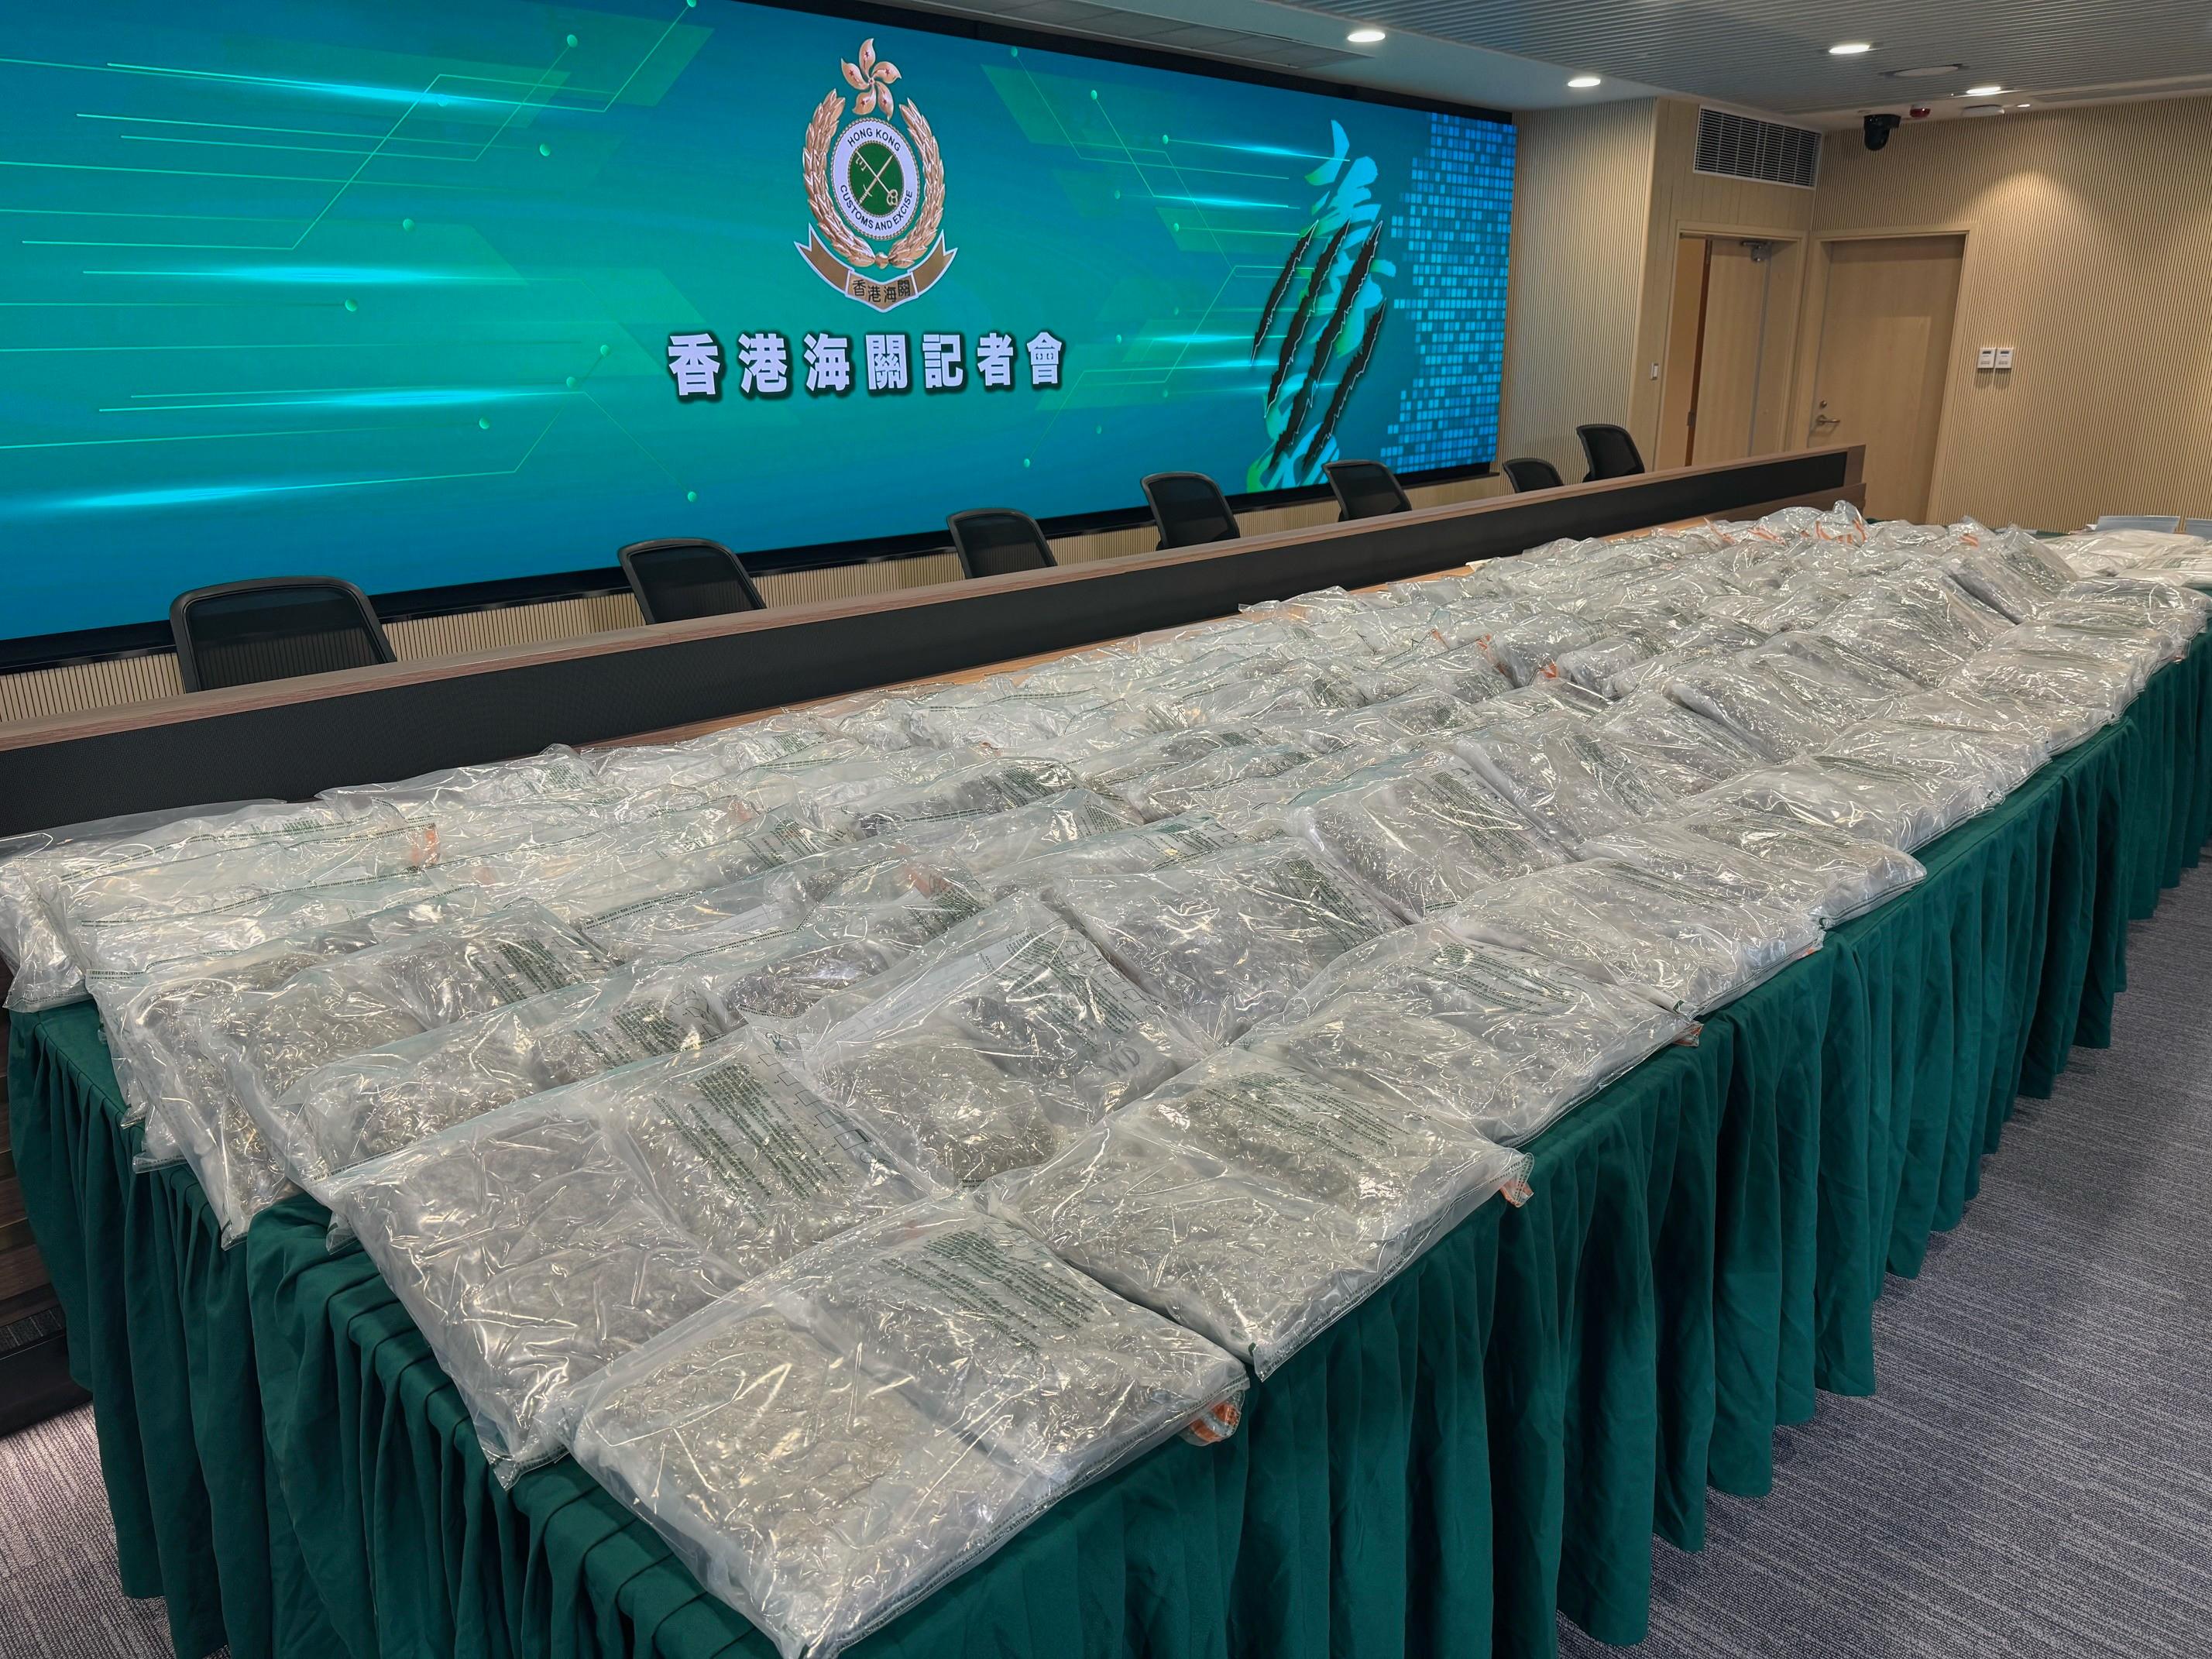 Hong Kong Customs conducted a series of anti-narcotics operations in various districts across the territory from September 25 till yesterday (September 27) and detected two dangerous drugs trafficking cases. Suspected dangerous drugs worth about $50 million in total were seized. The seizures include about 153 kilograms of suspected cannabis buds, about 24kg of suspected ketamine and a batch of drug packaging paraphernalia. Photo shows the suspected cannabis buds seized in the first case.